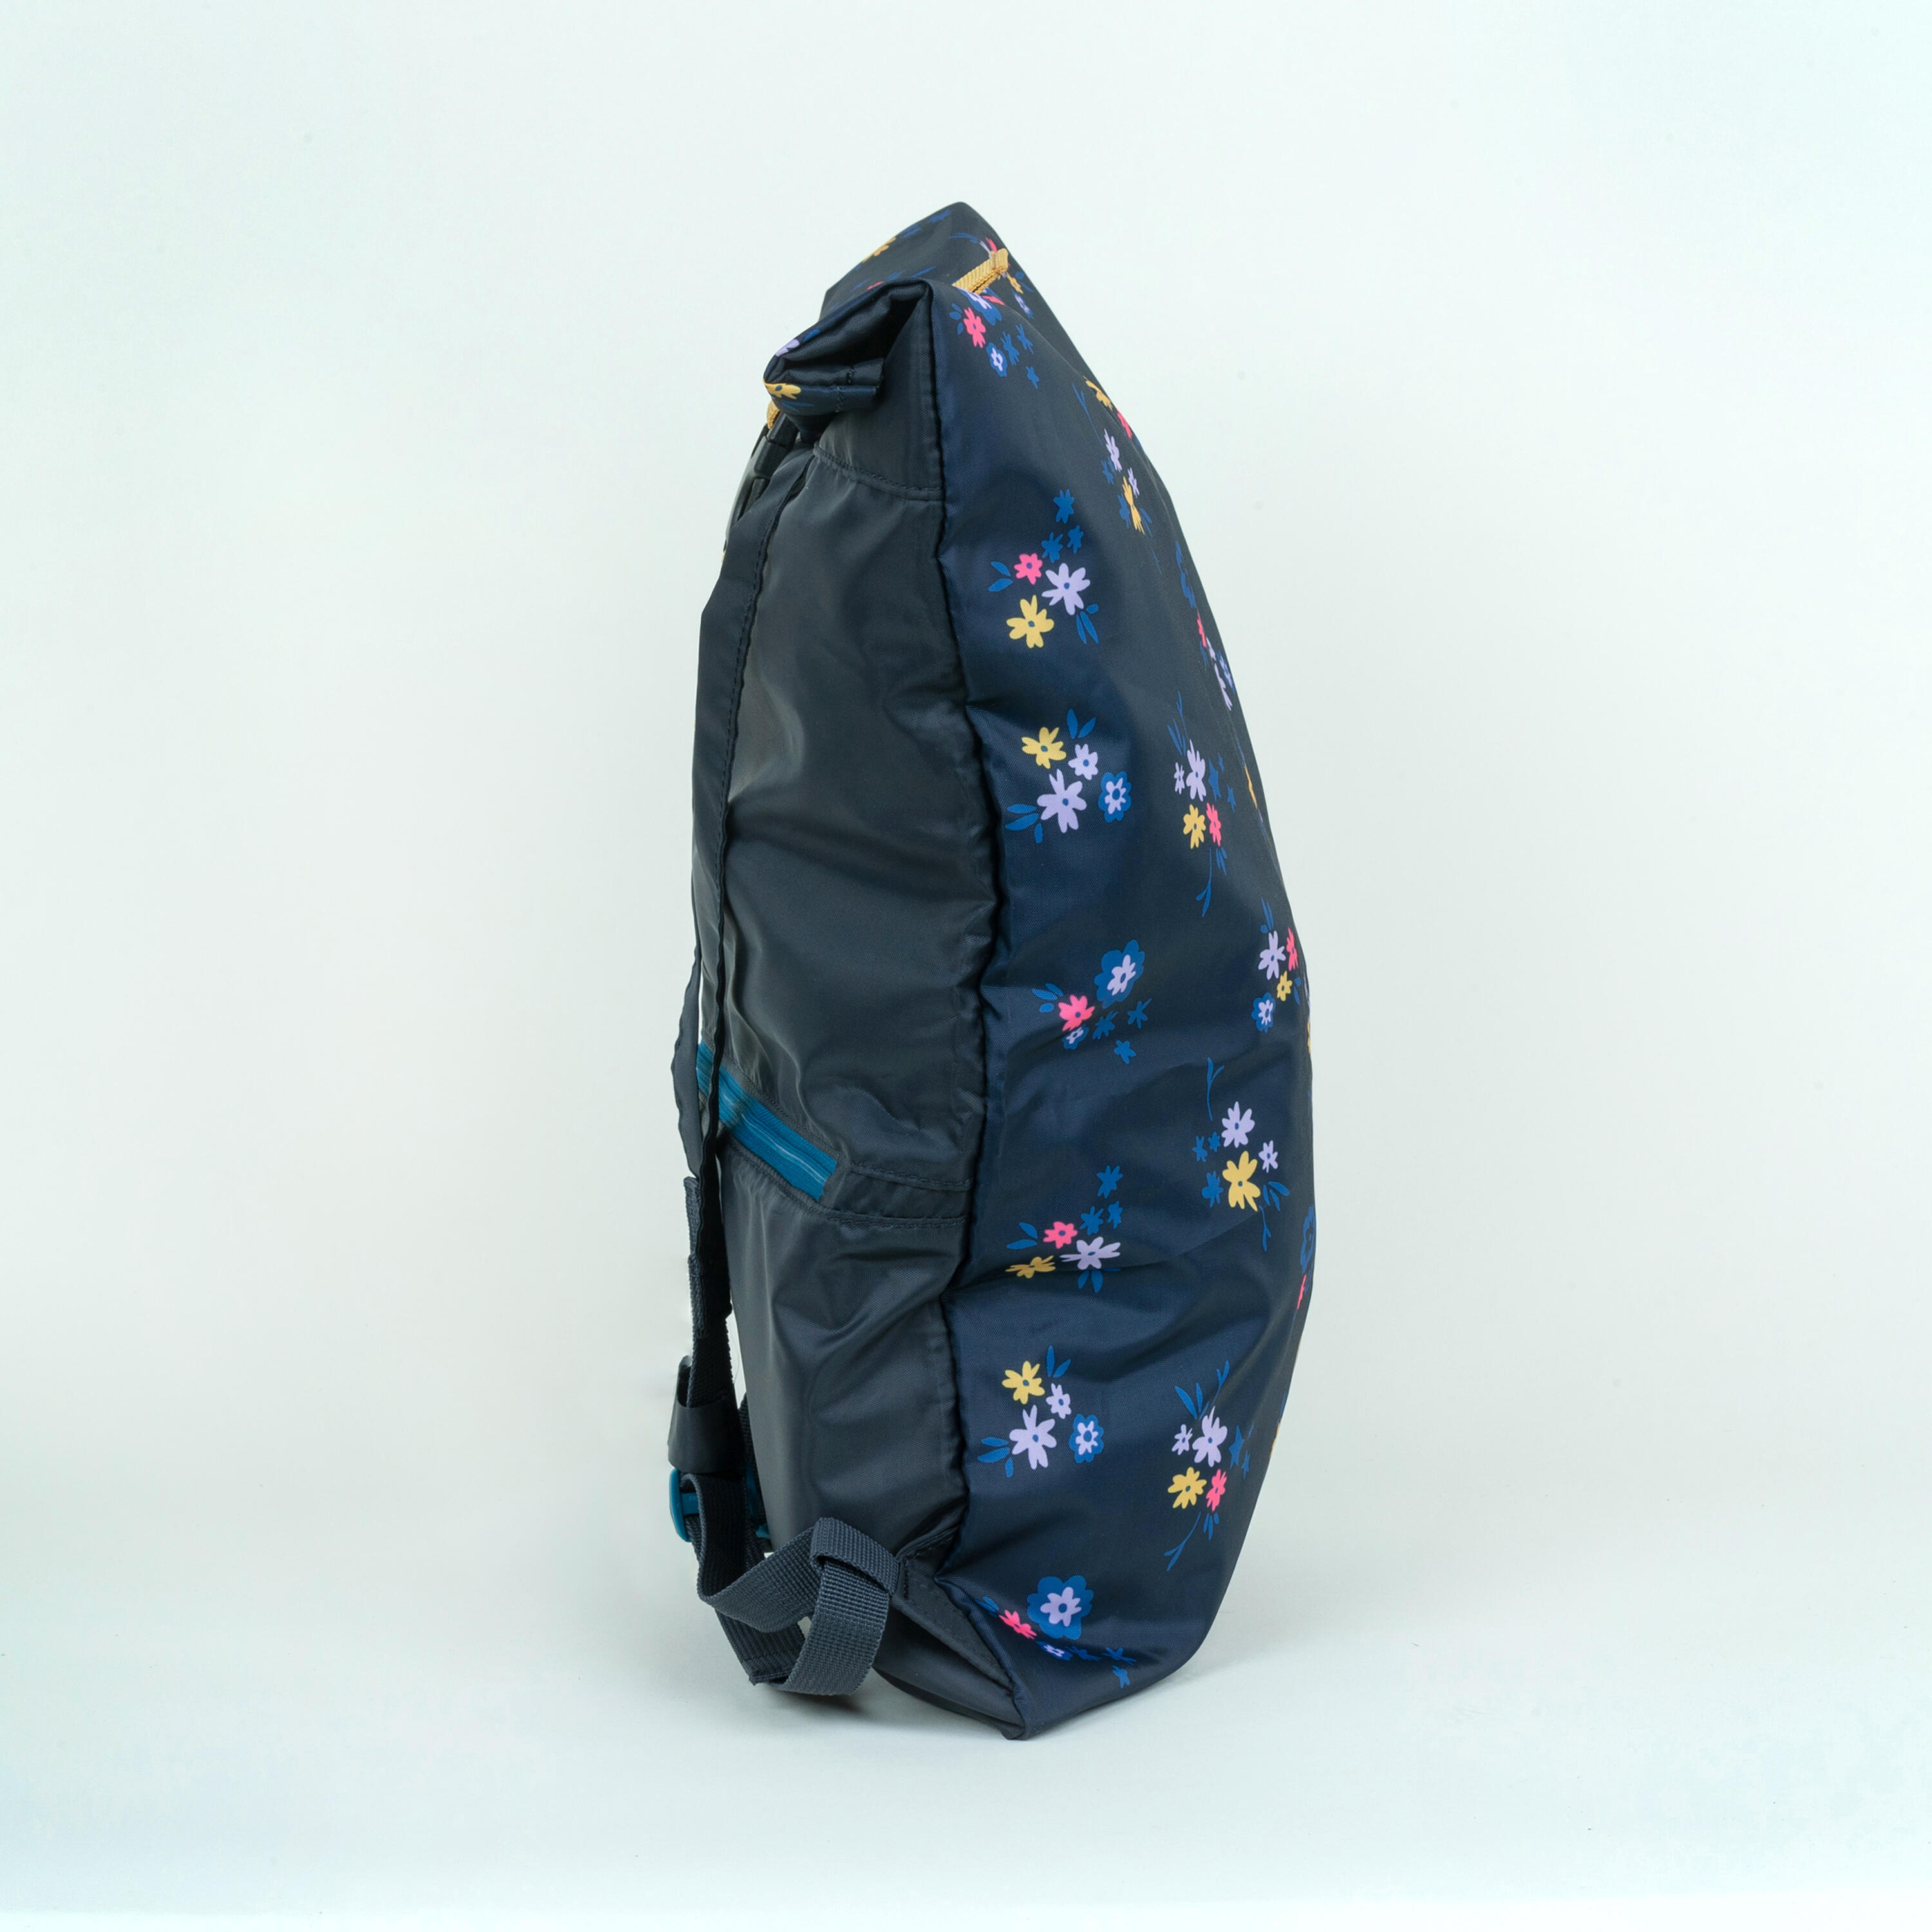 Swimming backpack Lighty Lily navy 4/6